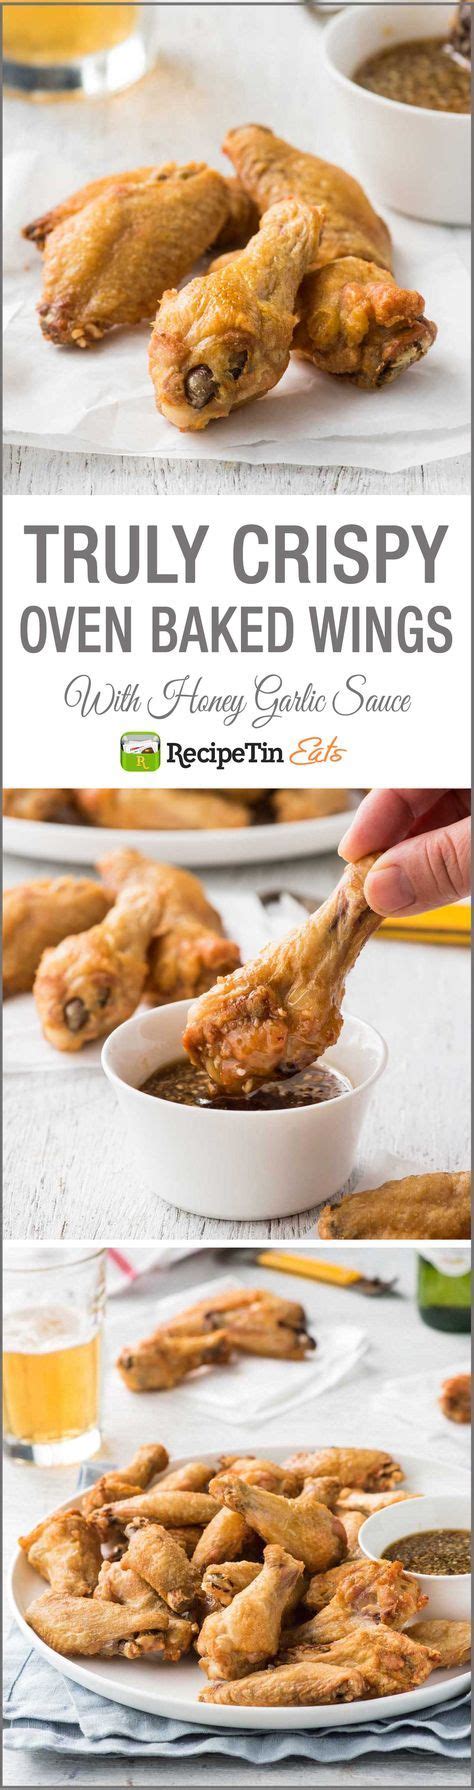 truly crispy oven baked chicken wings recipe baked chicken wings